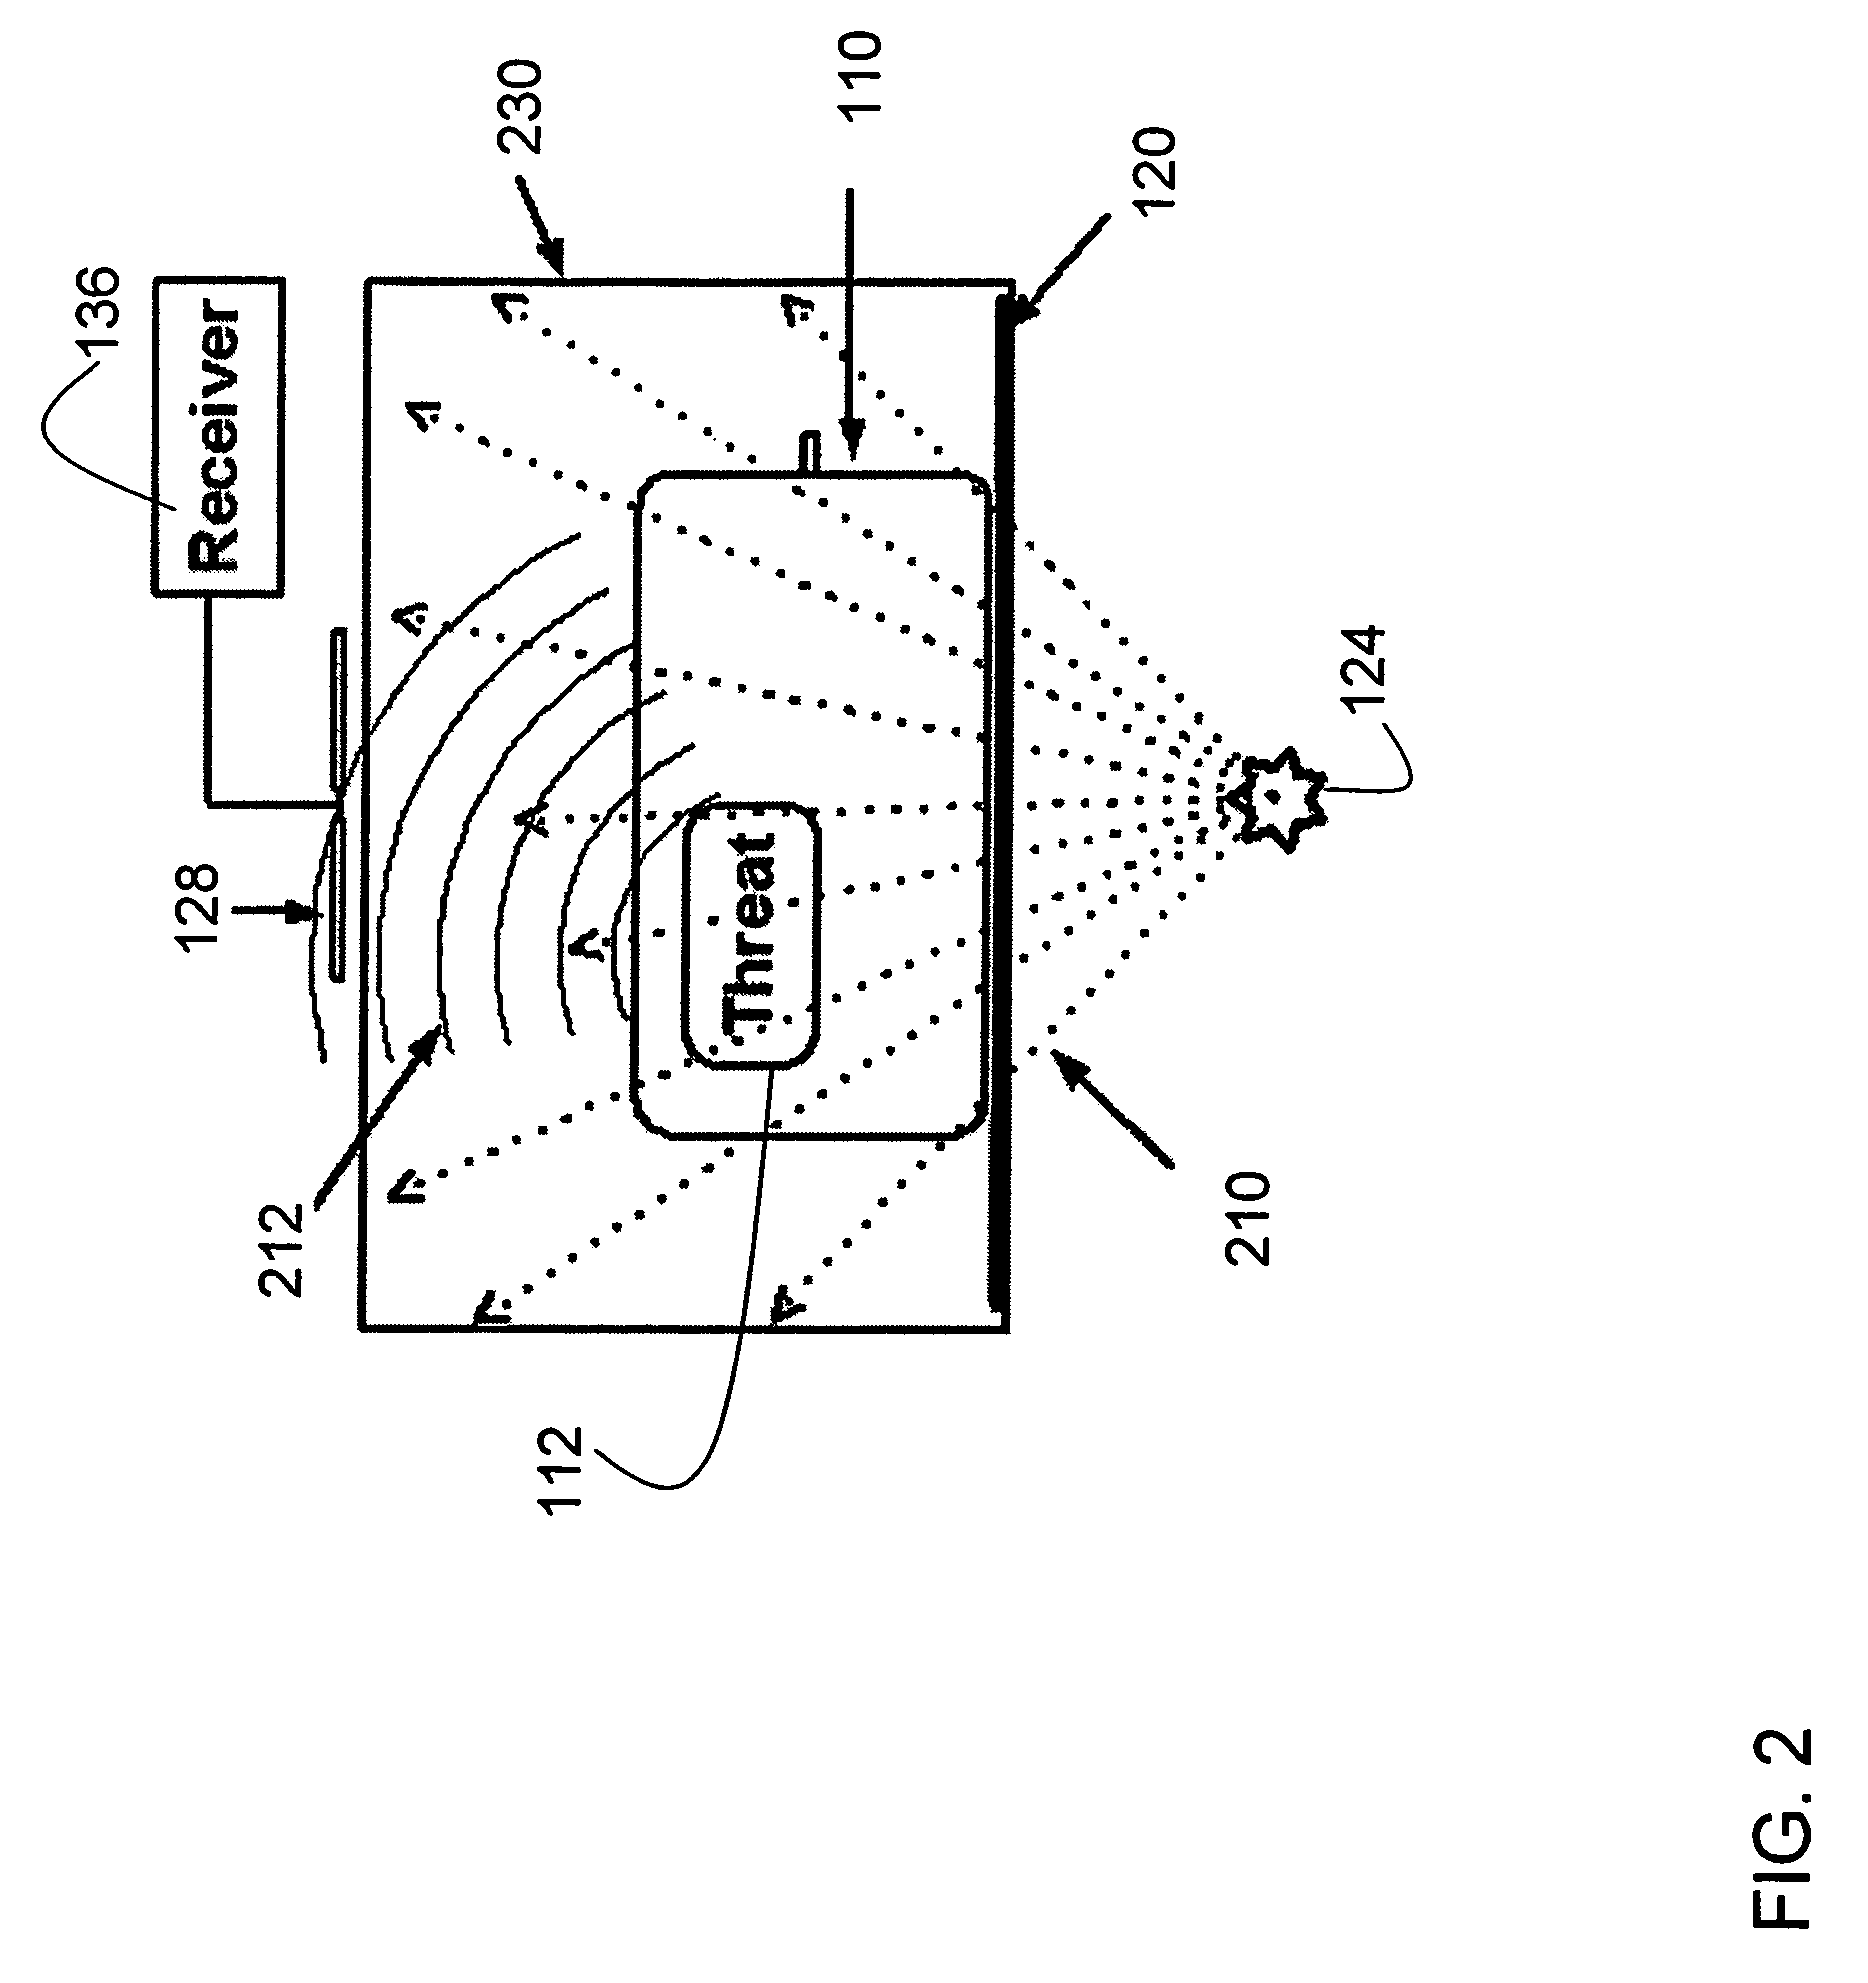 Method and apparatus for detecting contraband using radiated compound signatures